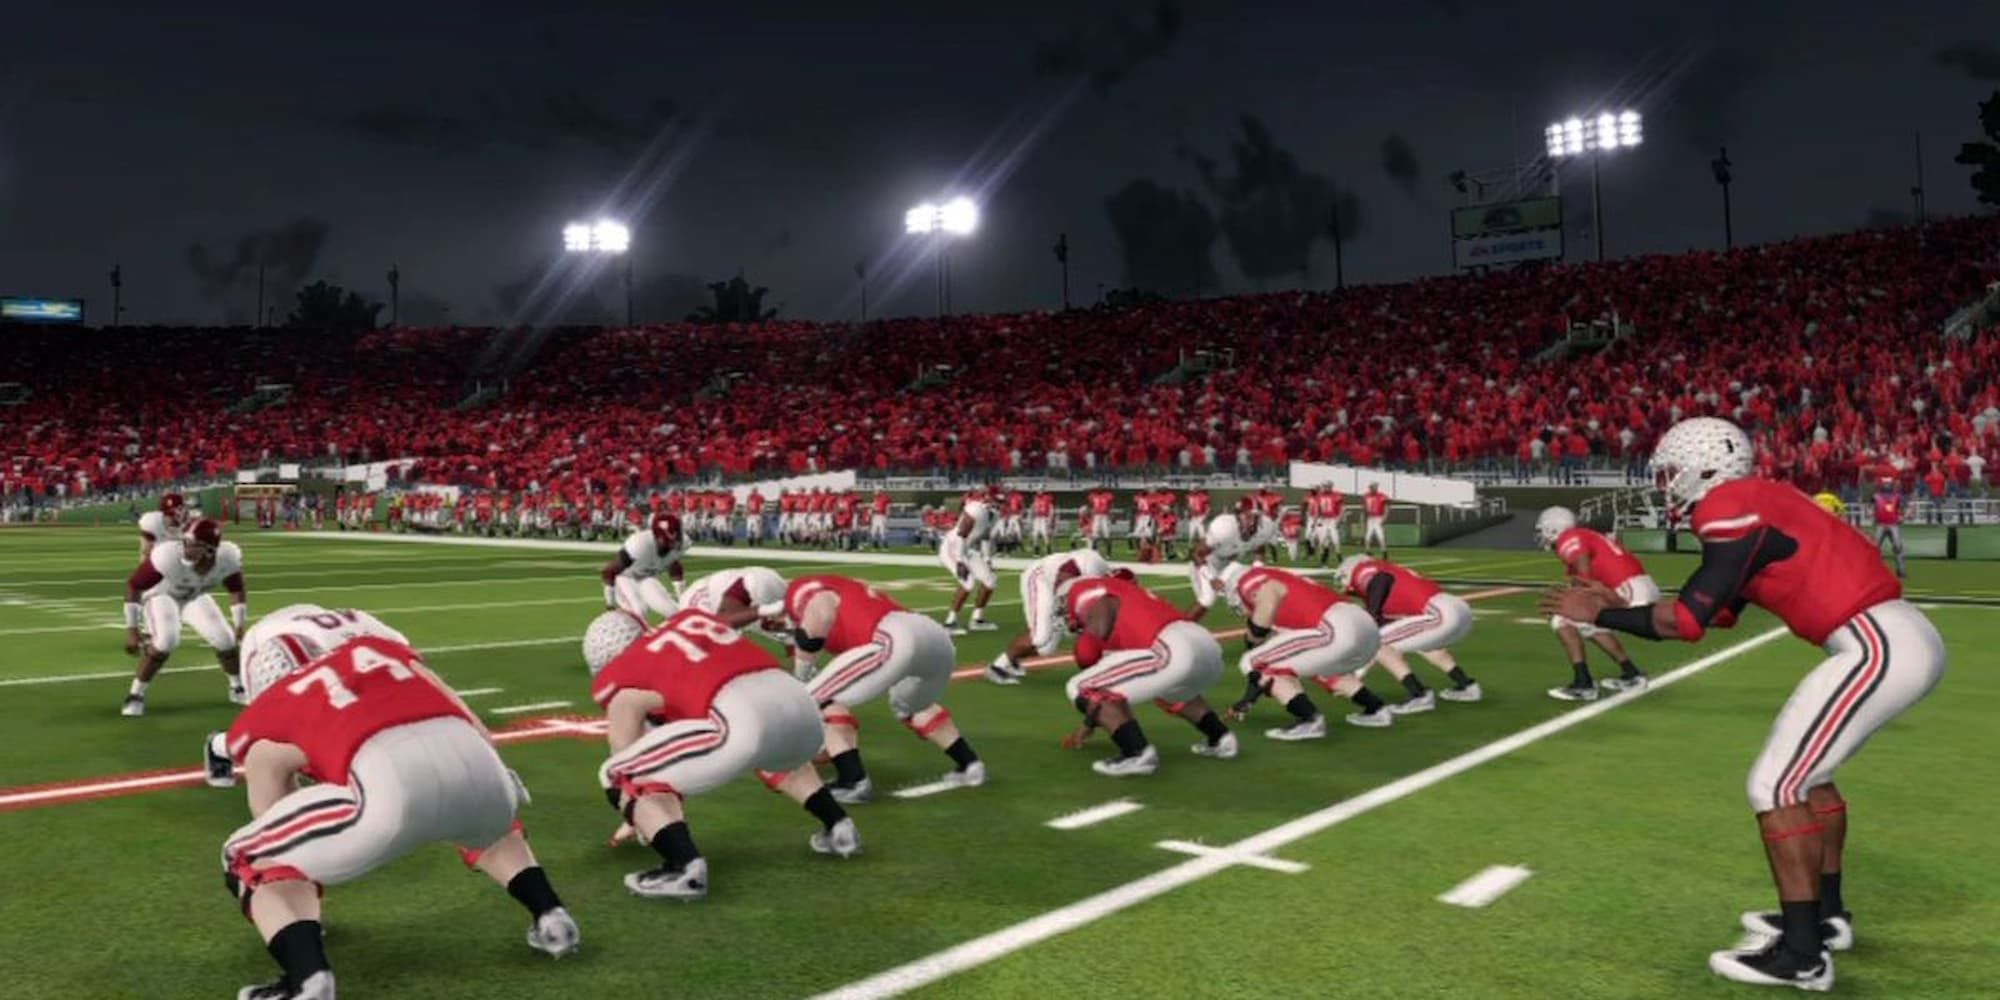 The Ohio State quarterback is ready to call for the snap of the ball at NCAA Football 14.